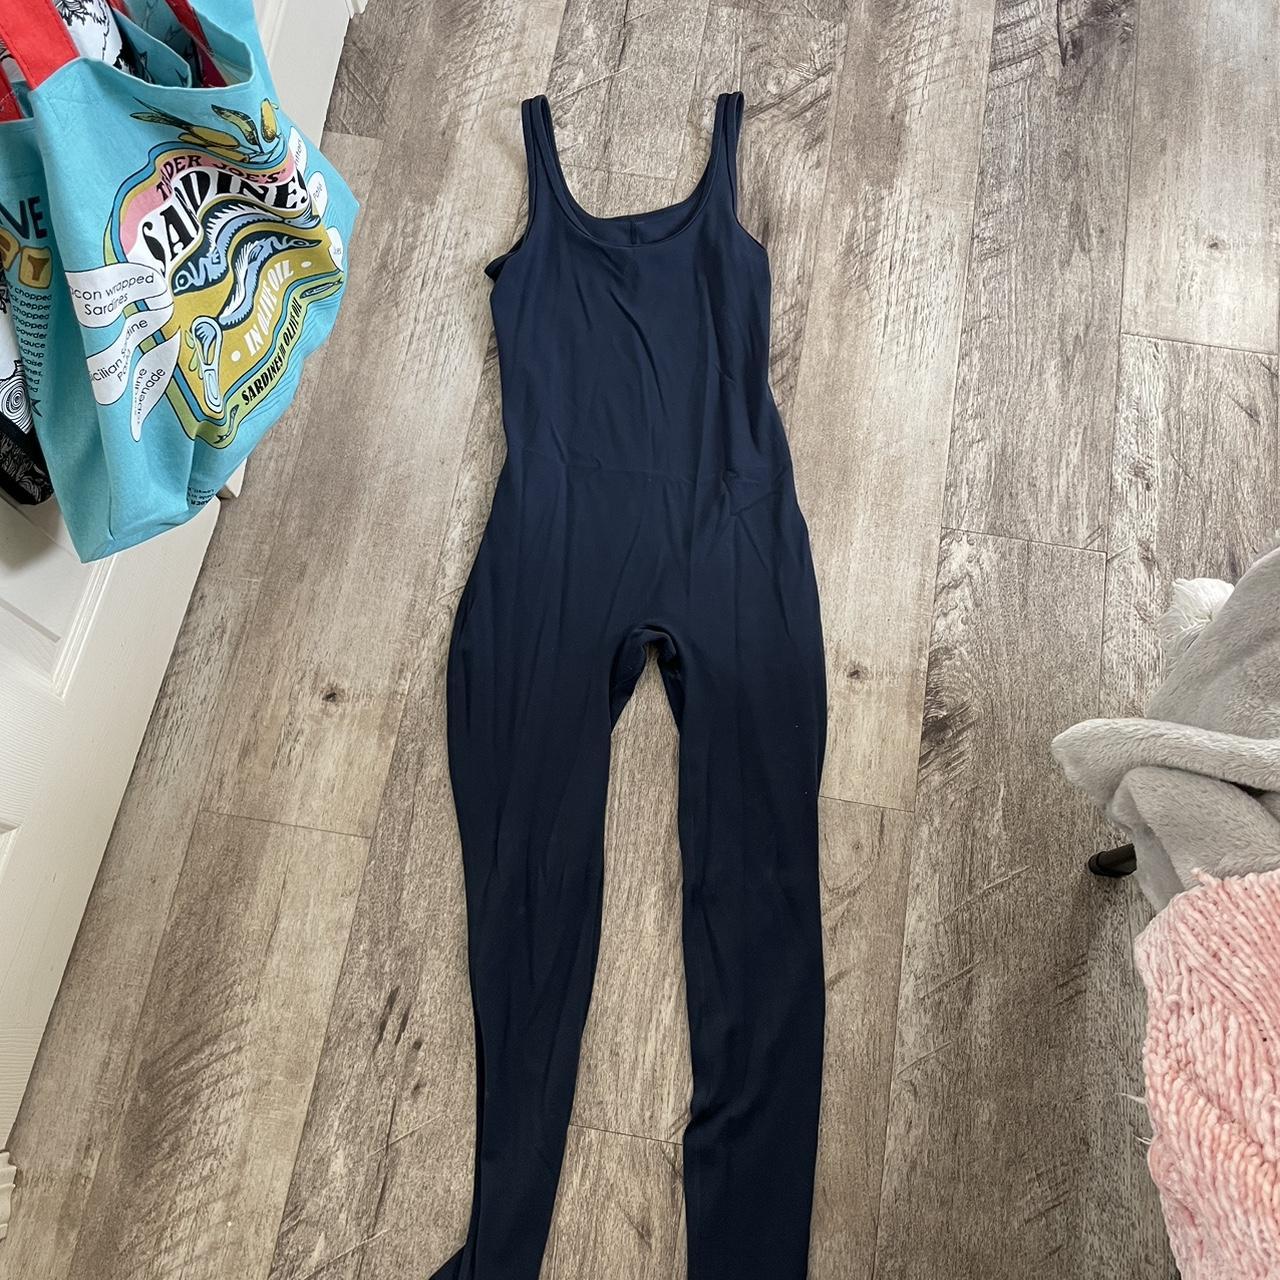 Aritzia Babaton jumpsuit! Awesome for all occasions. - Depop